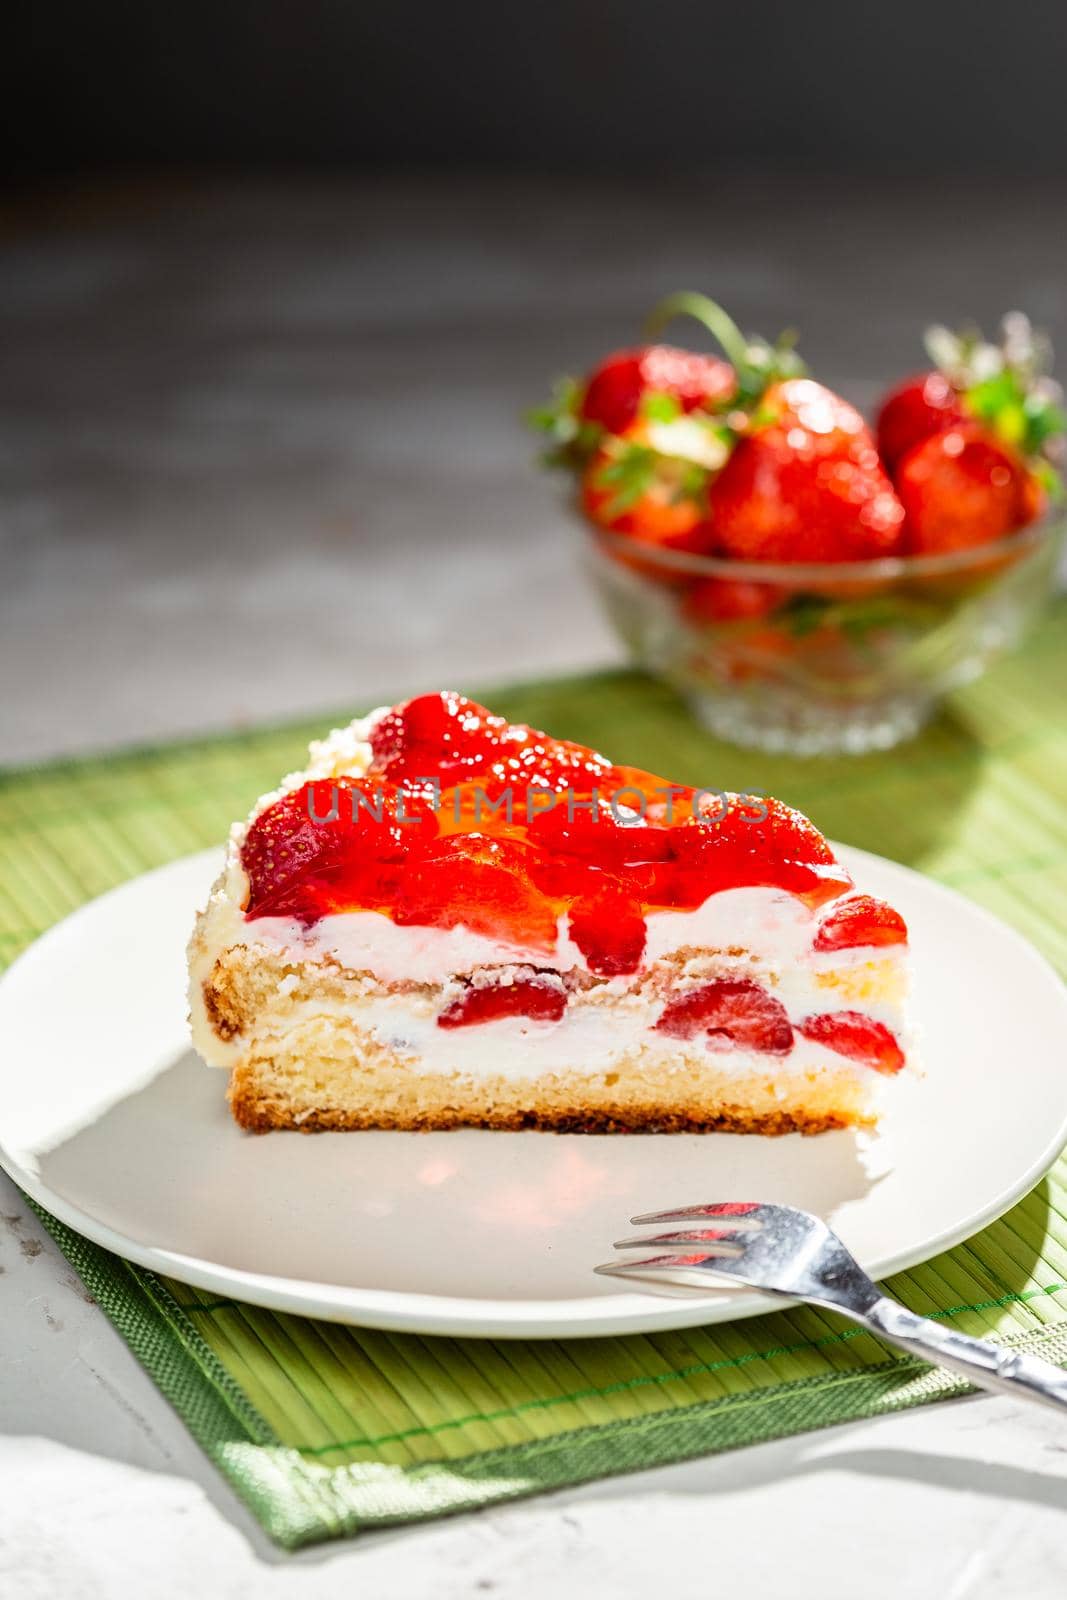 A piece of strawberry cake served on a white plate redy to eat